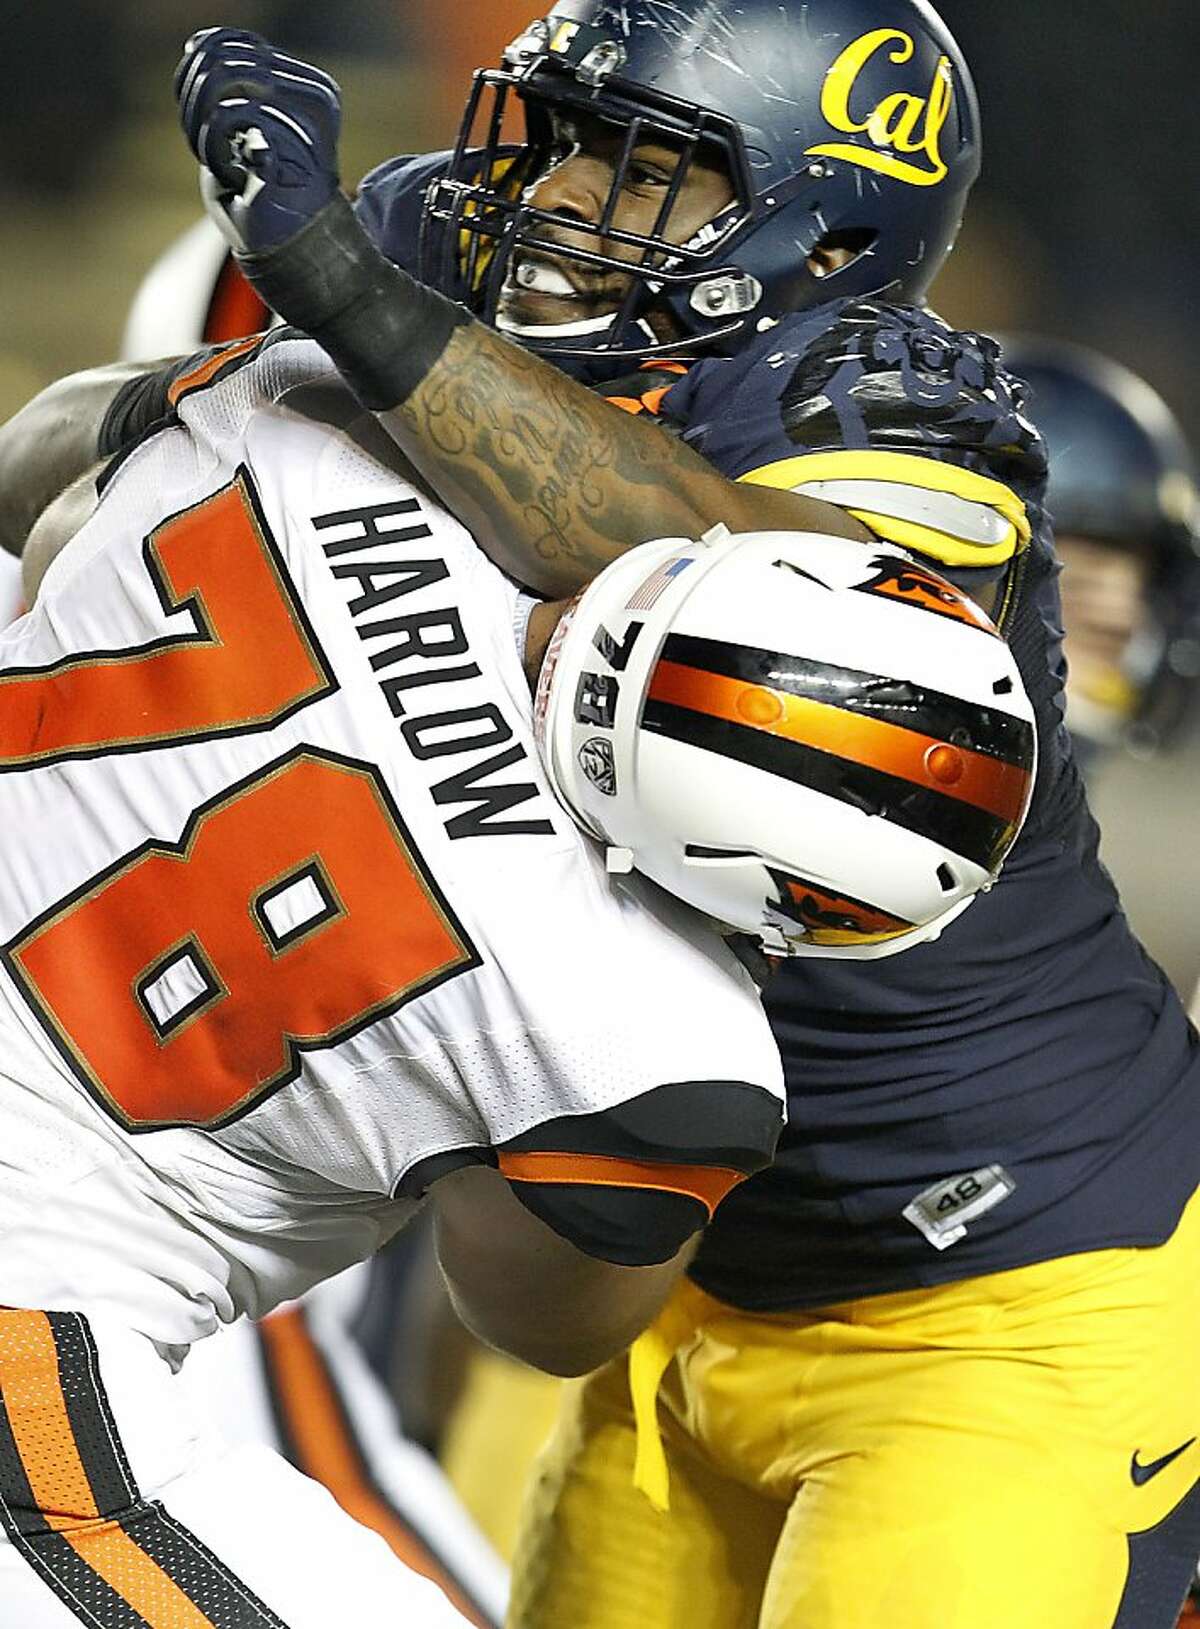 California defensive lineman Deandre Coleman (91) rushes the quarterback against Oregon State offensive linesman Sean Harlow (78) during the second half of an NCAA college football game in Berkeley, Calif., Saturday, Oct. 19, 2013. (AP Photo/Tony Avelar)